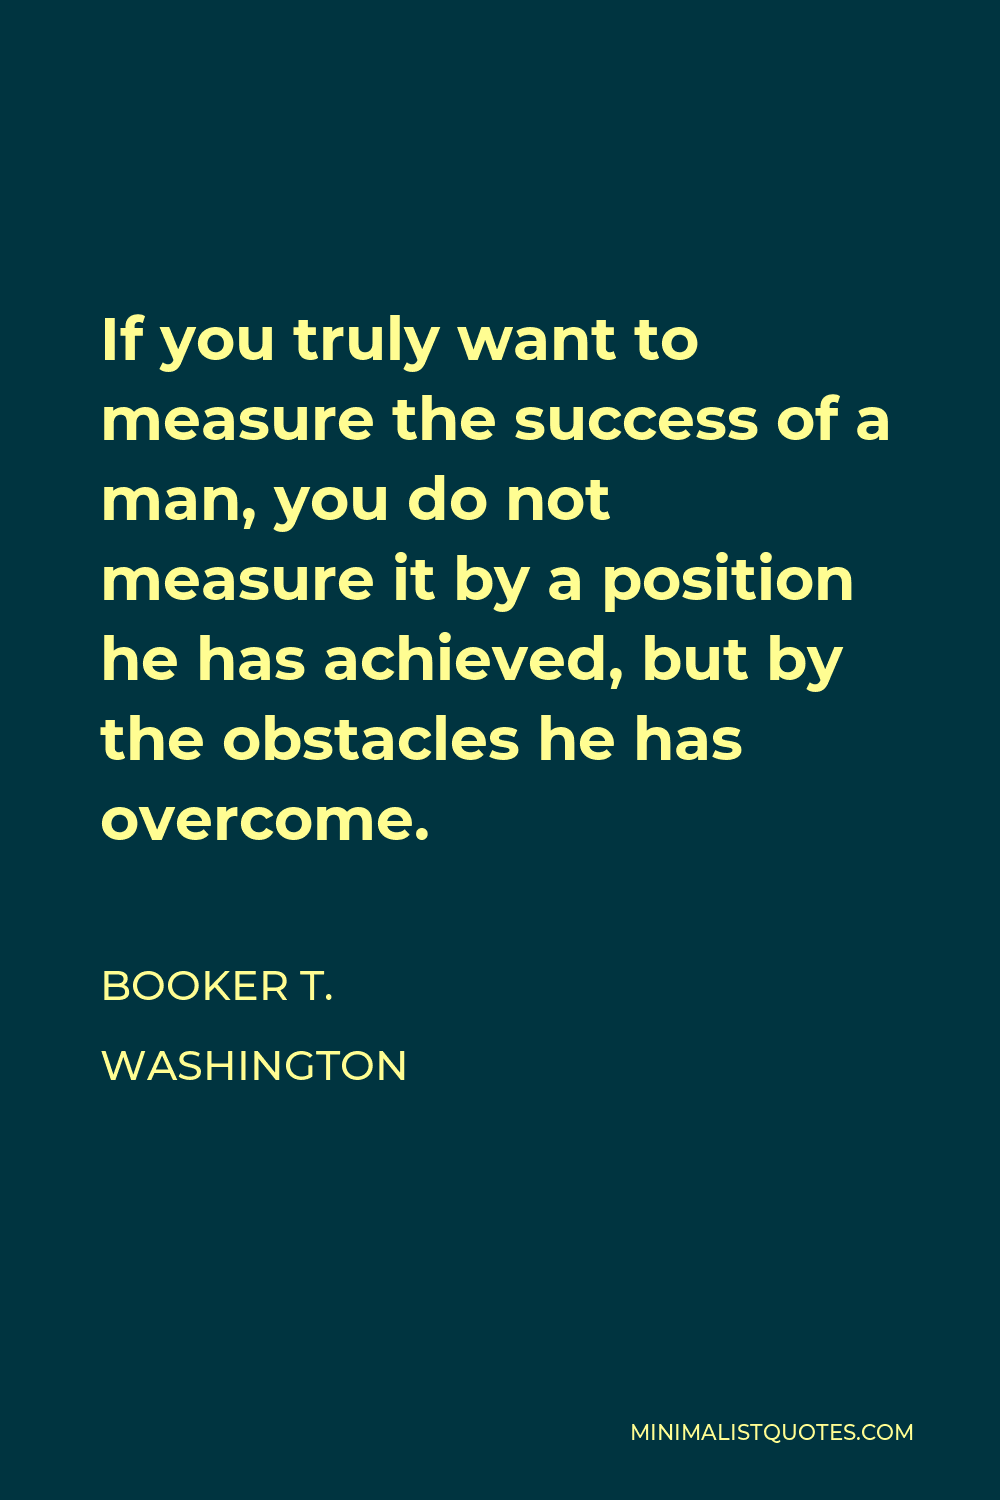 Booker T. Washington Quote - If you truly want to measure the success of a man, you do not measure it by a position he has achieved, but by the obstacles he has overcome.